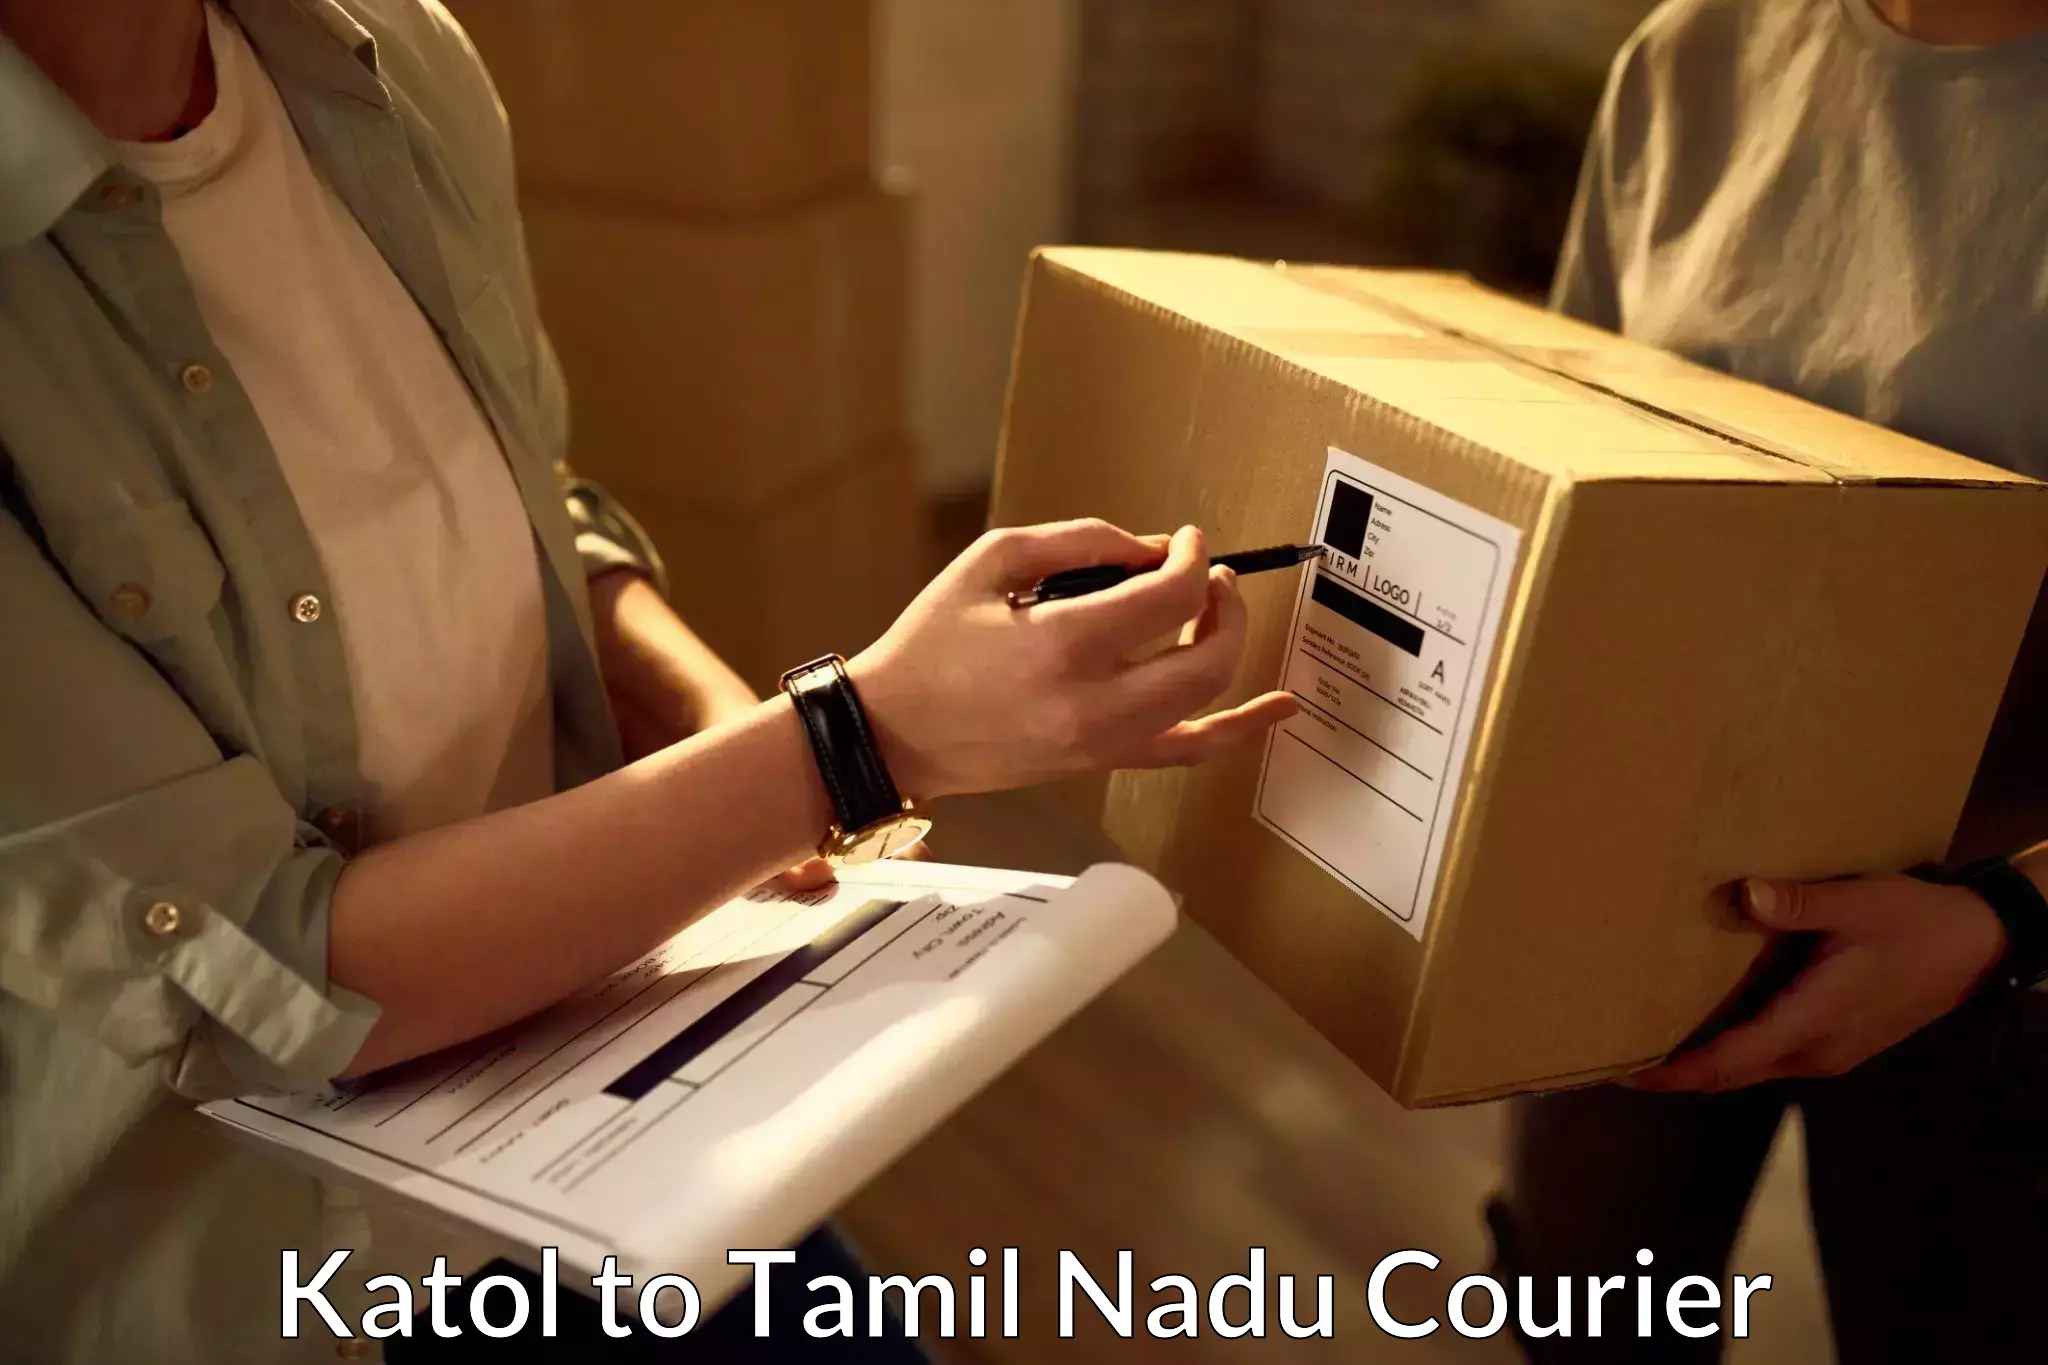 Reliable delivery network Katol to Sattur